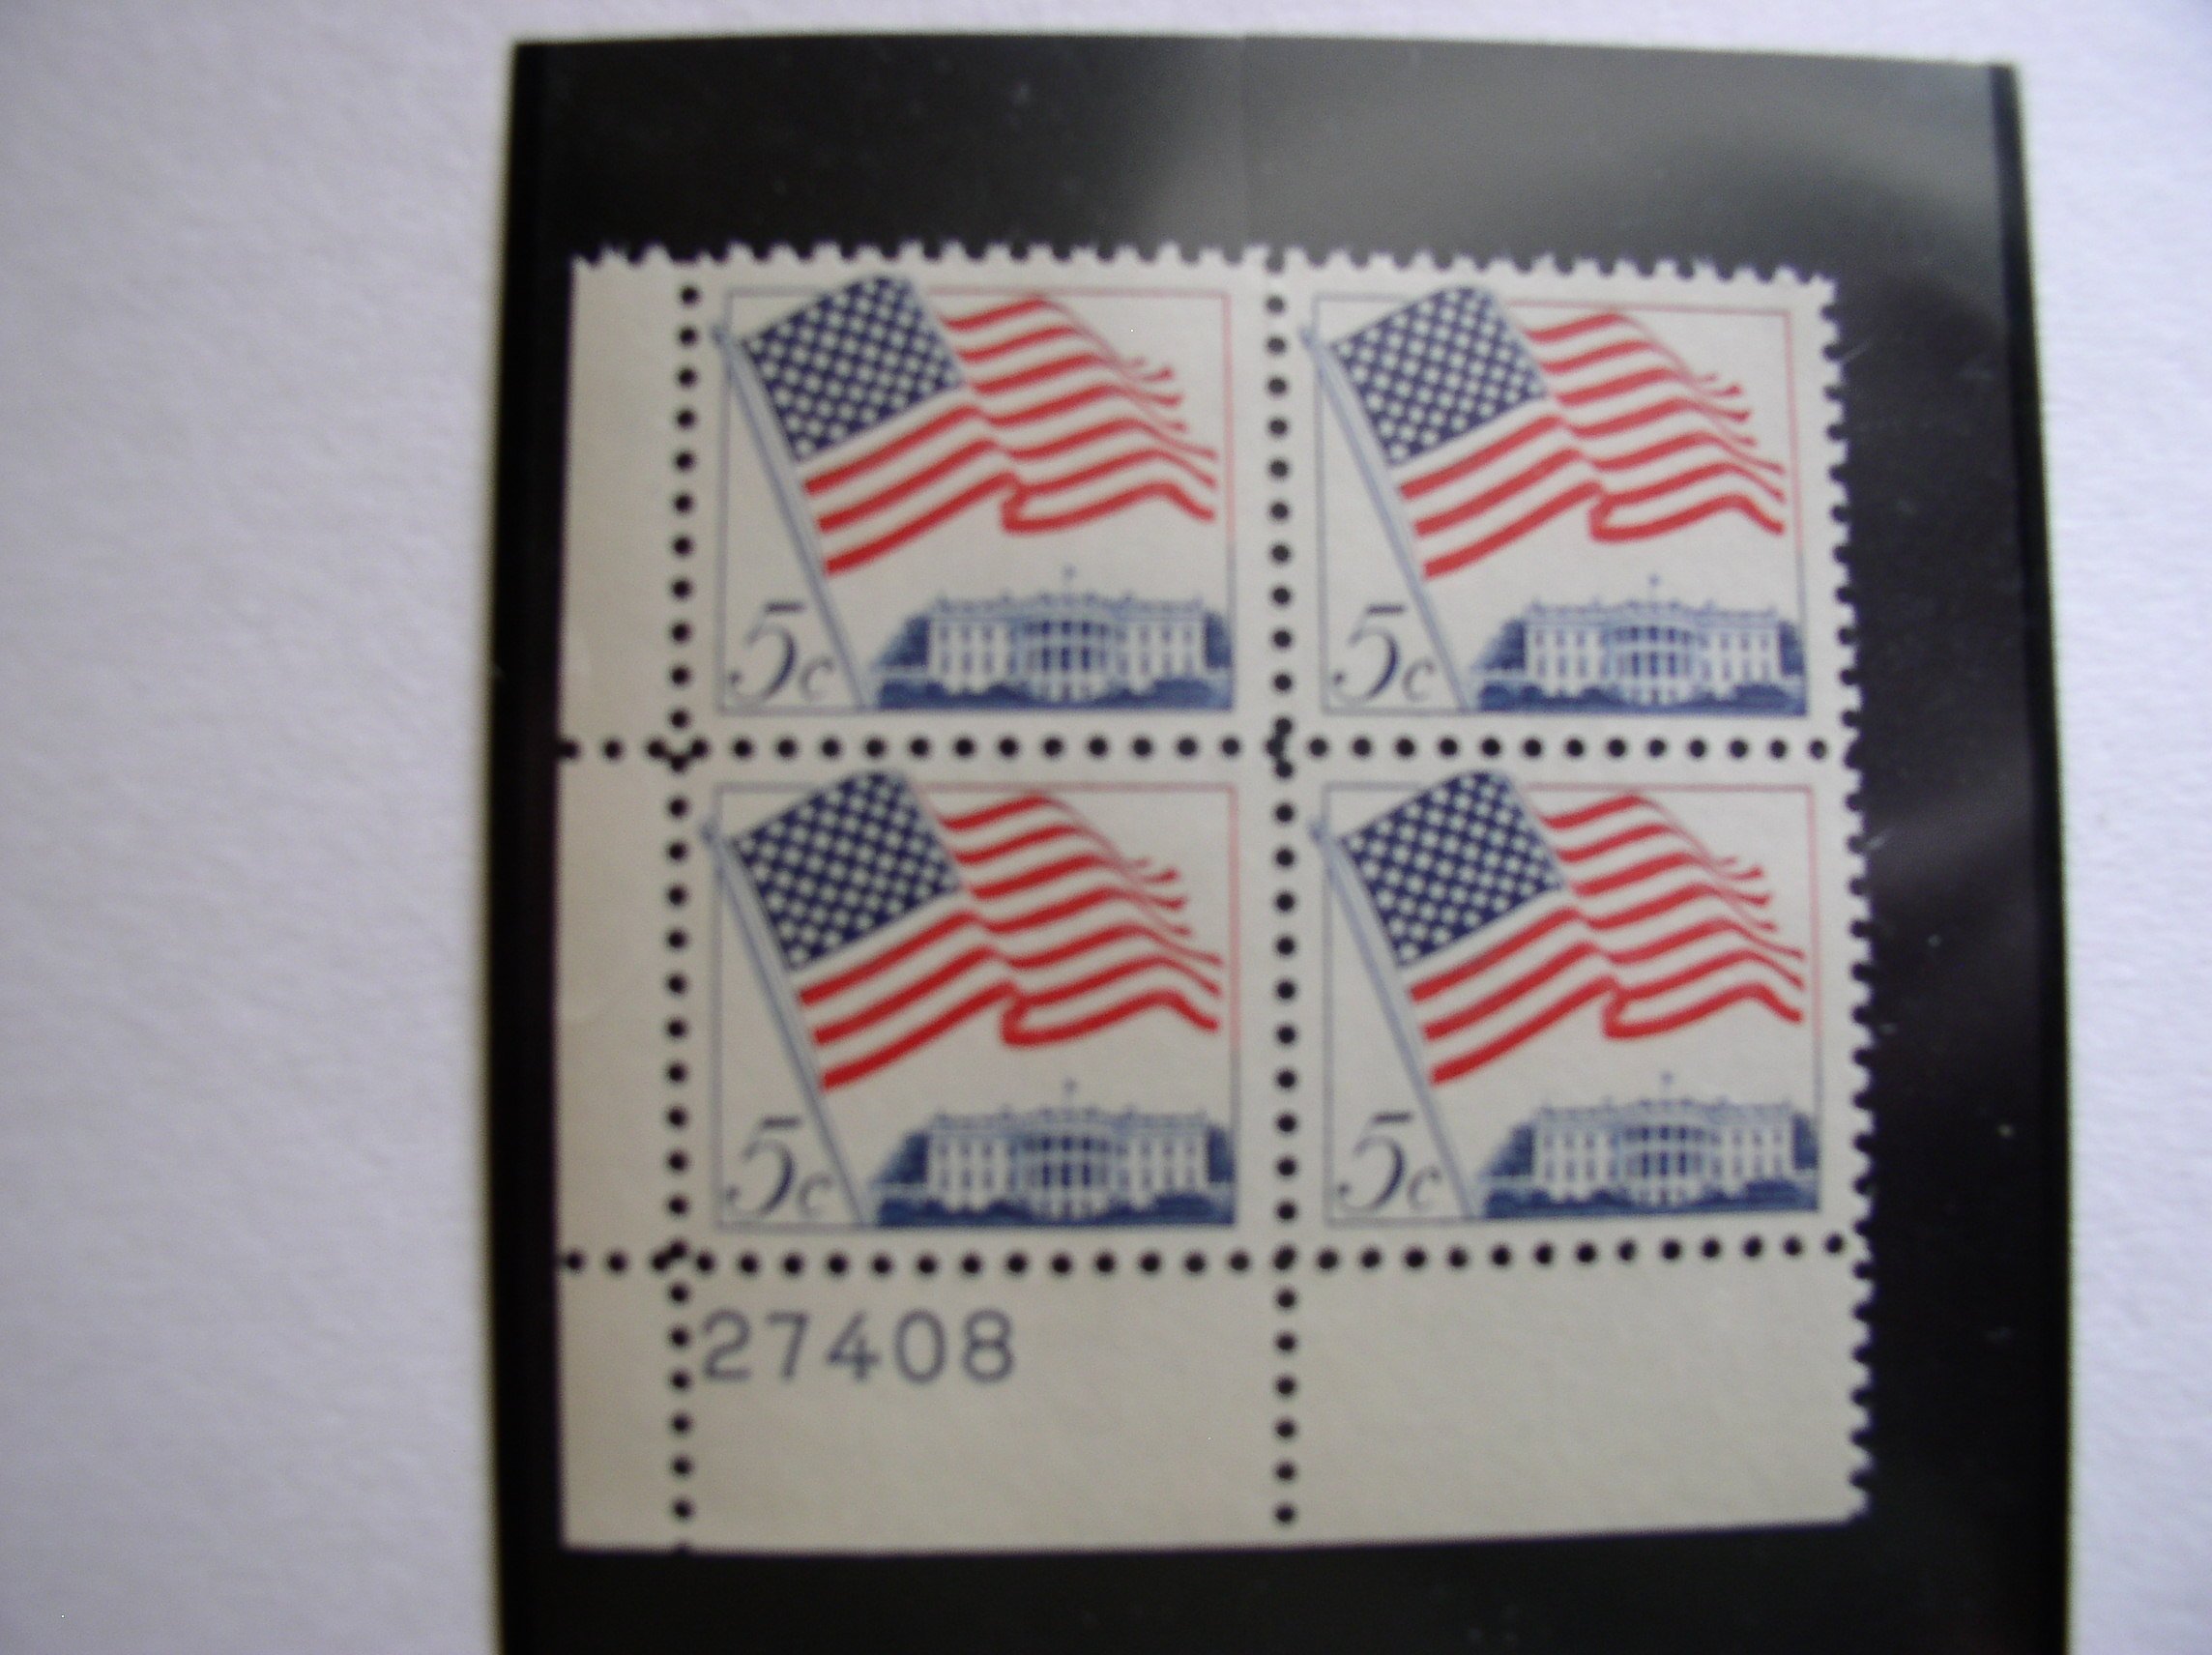 US 1963-66 Postal Stamps, Flag Over White House, S# 1208, PB of 4 5 Cent Stamps